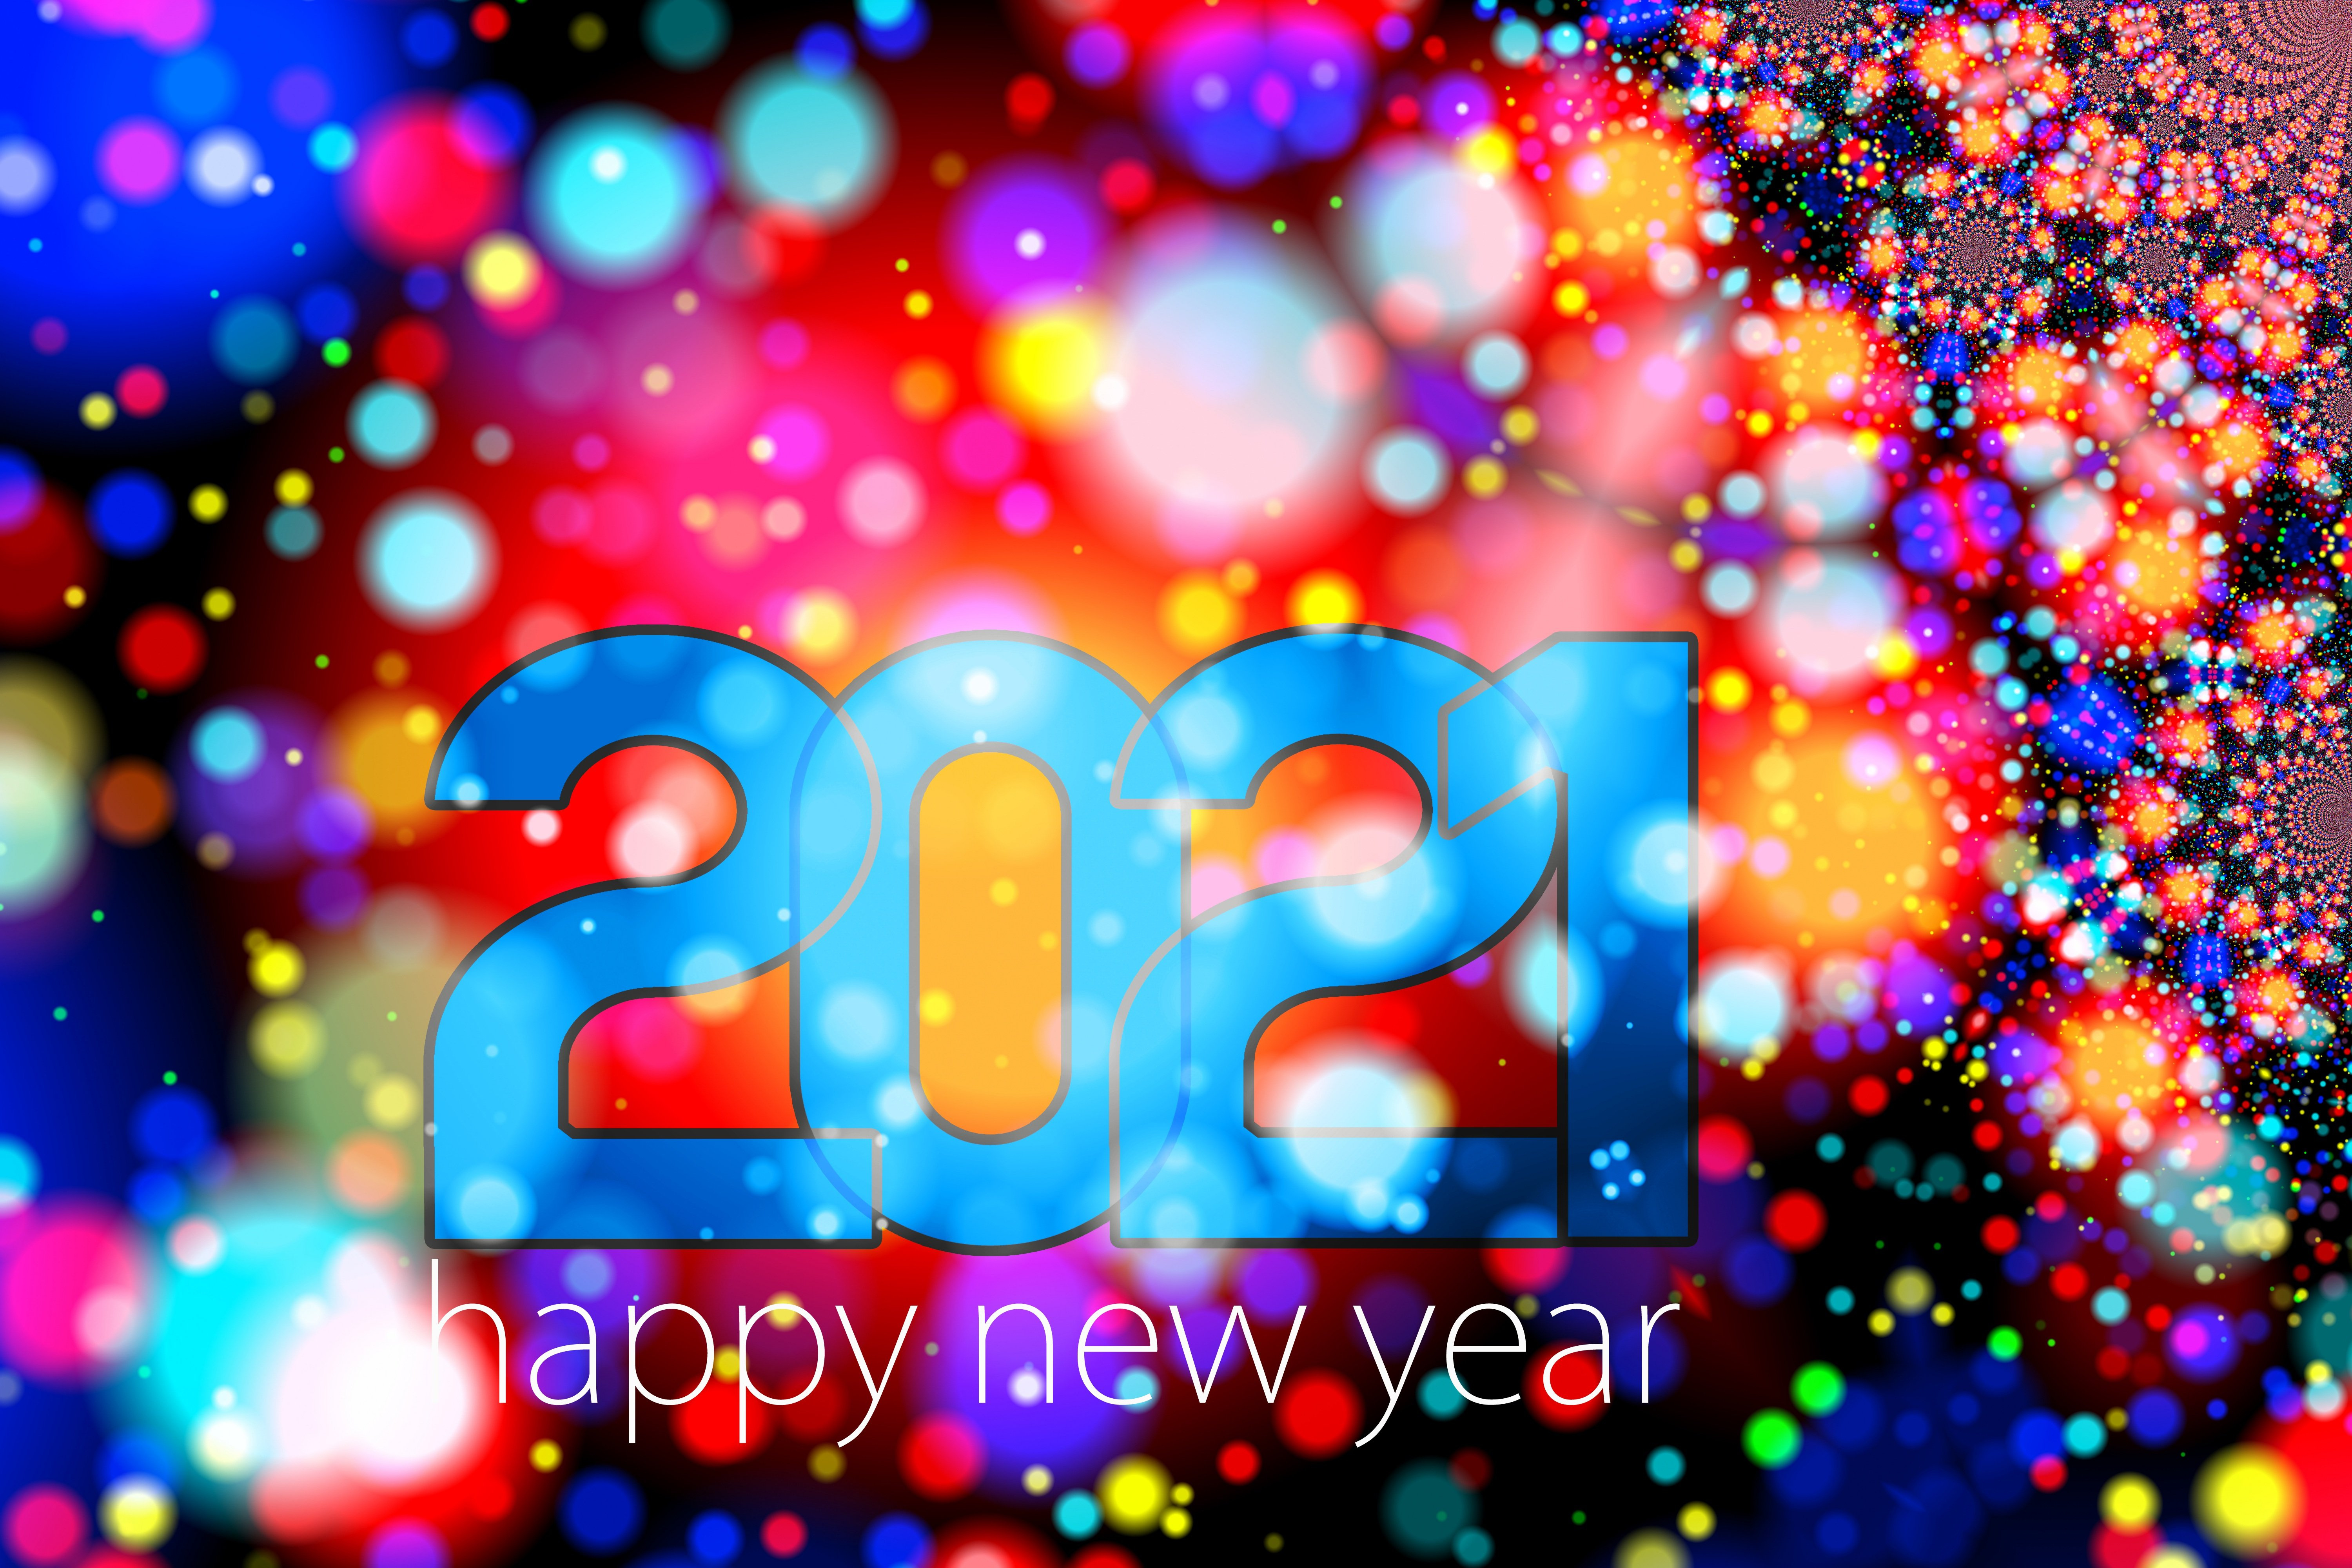 holiday, new year 2021, colorful, fractal, happy new year